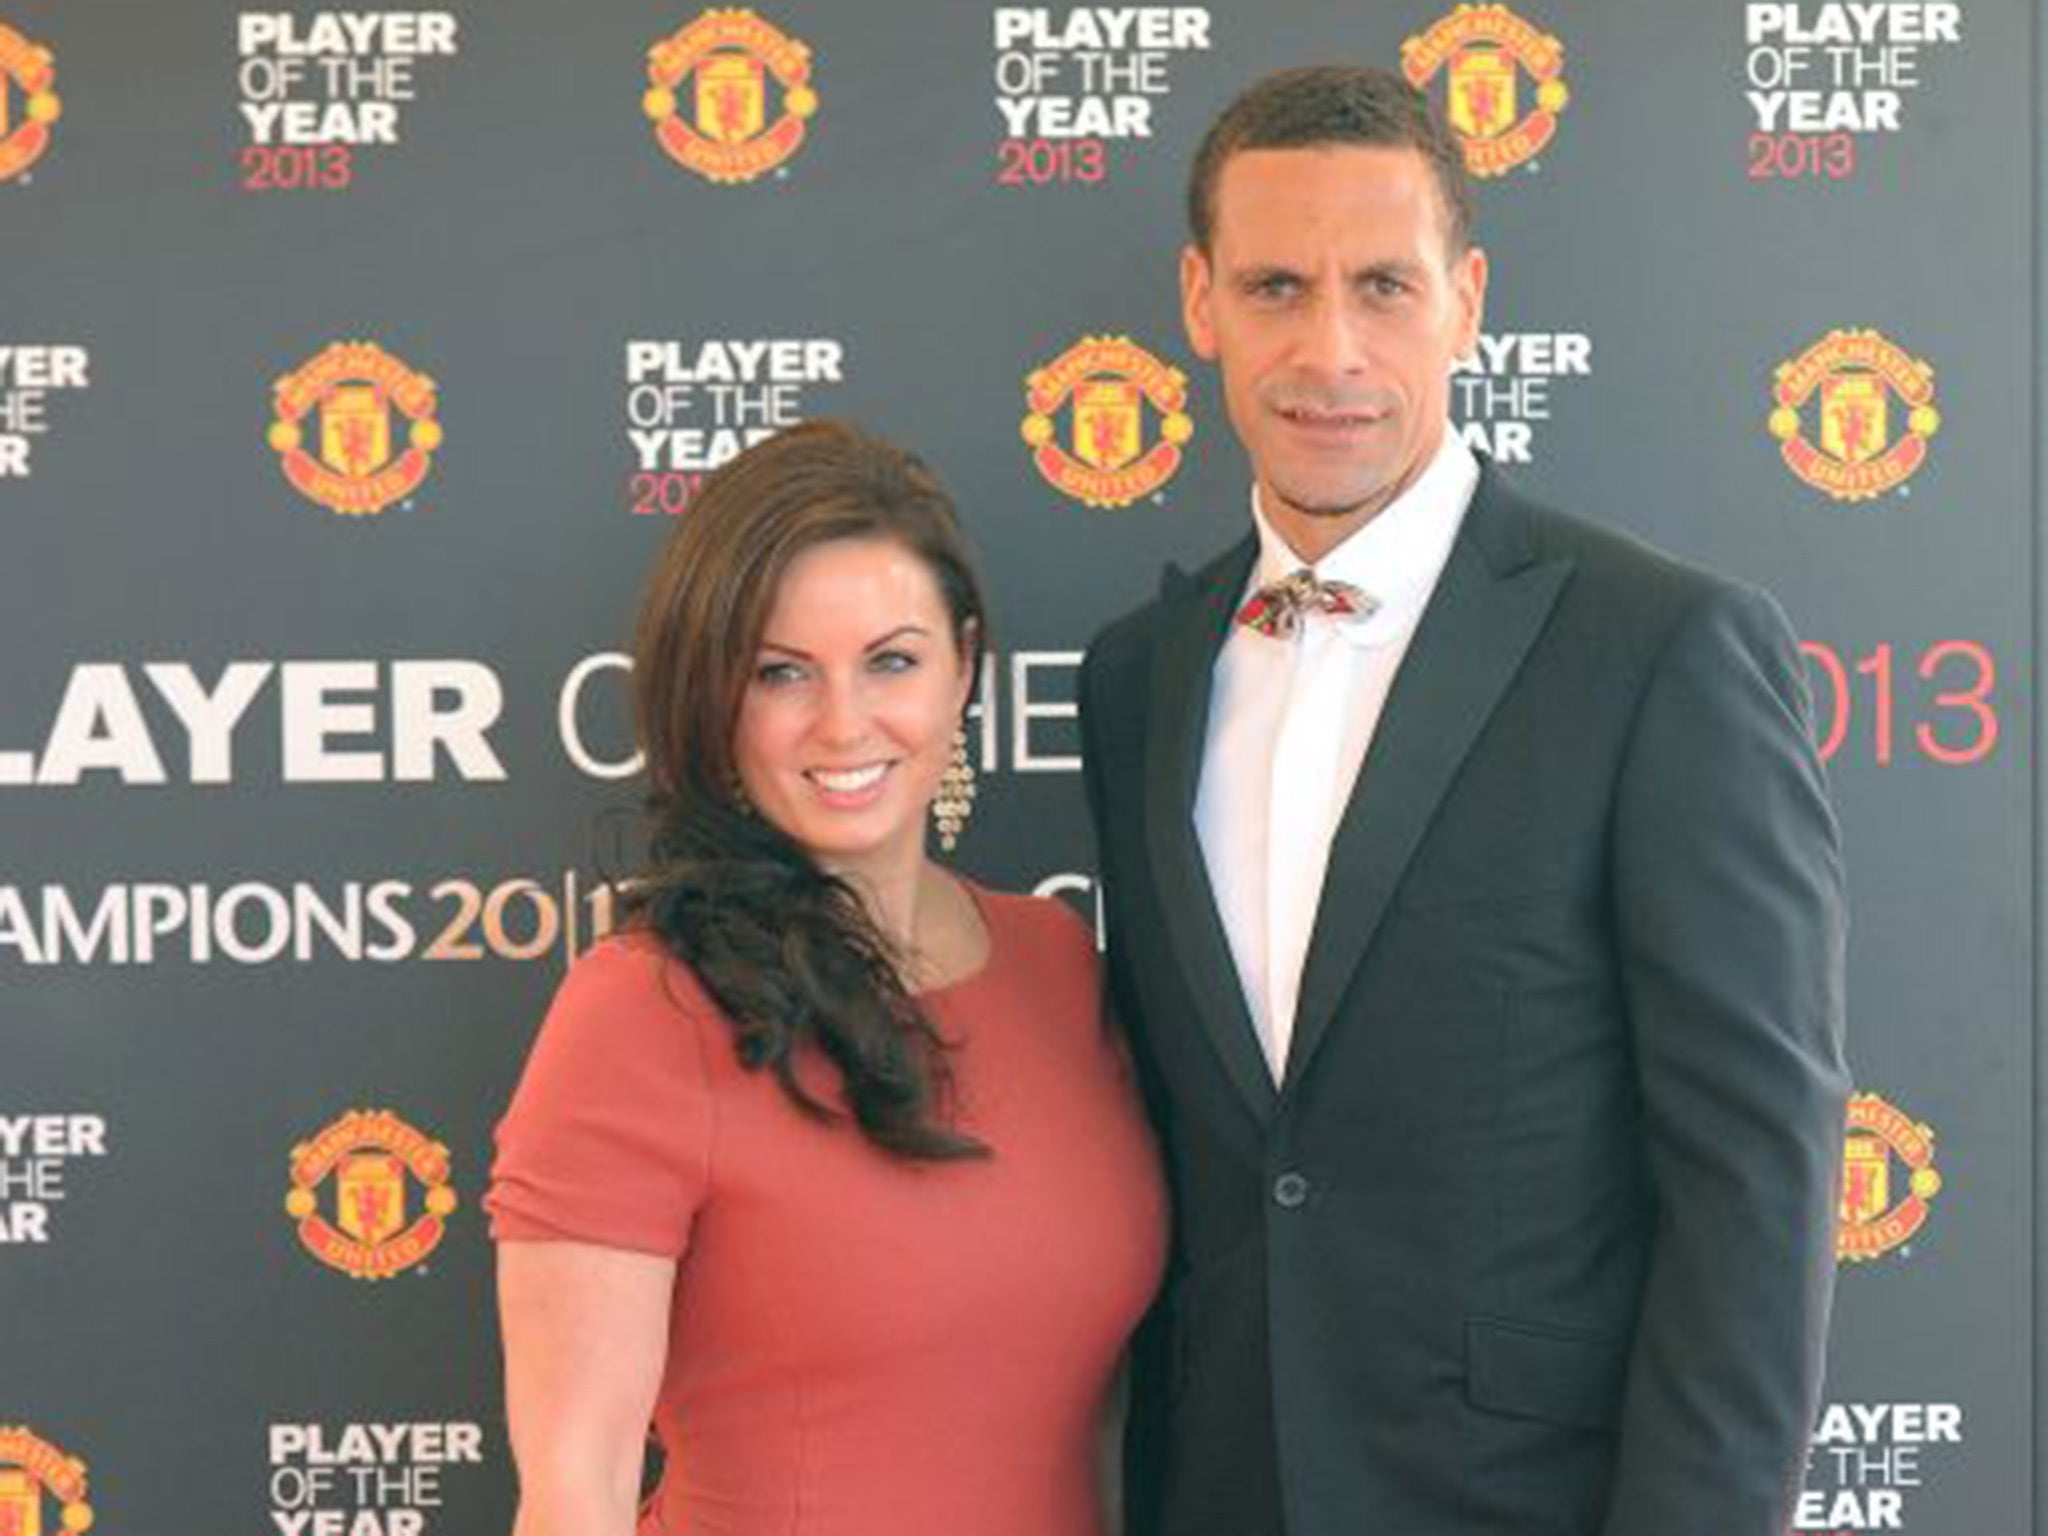 Rio Ferdinand with his late wife Rebecca at Manchester United's annual club awards event in 2013